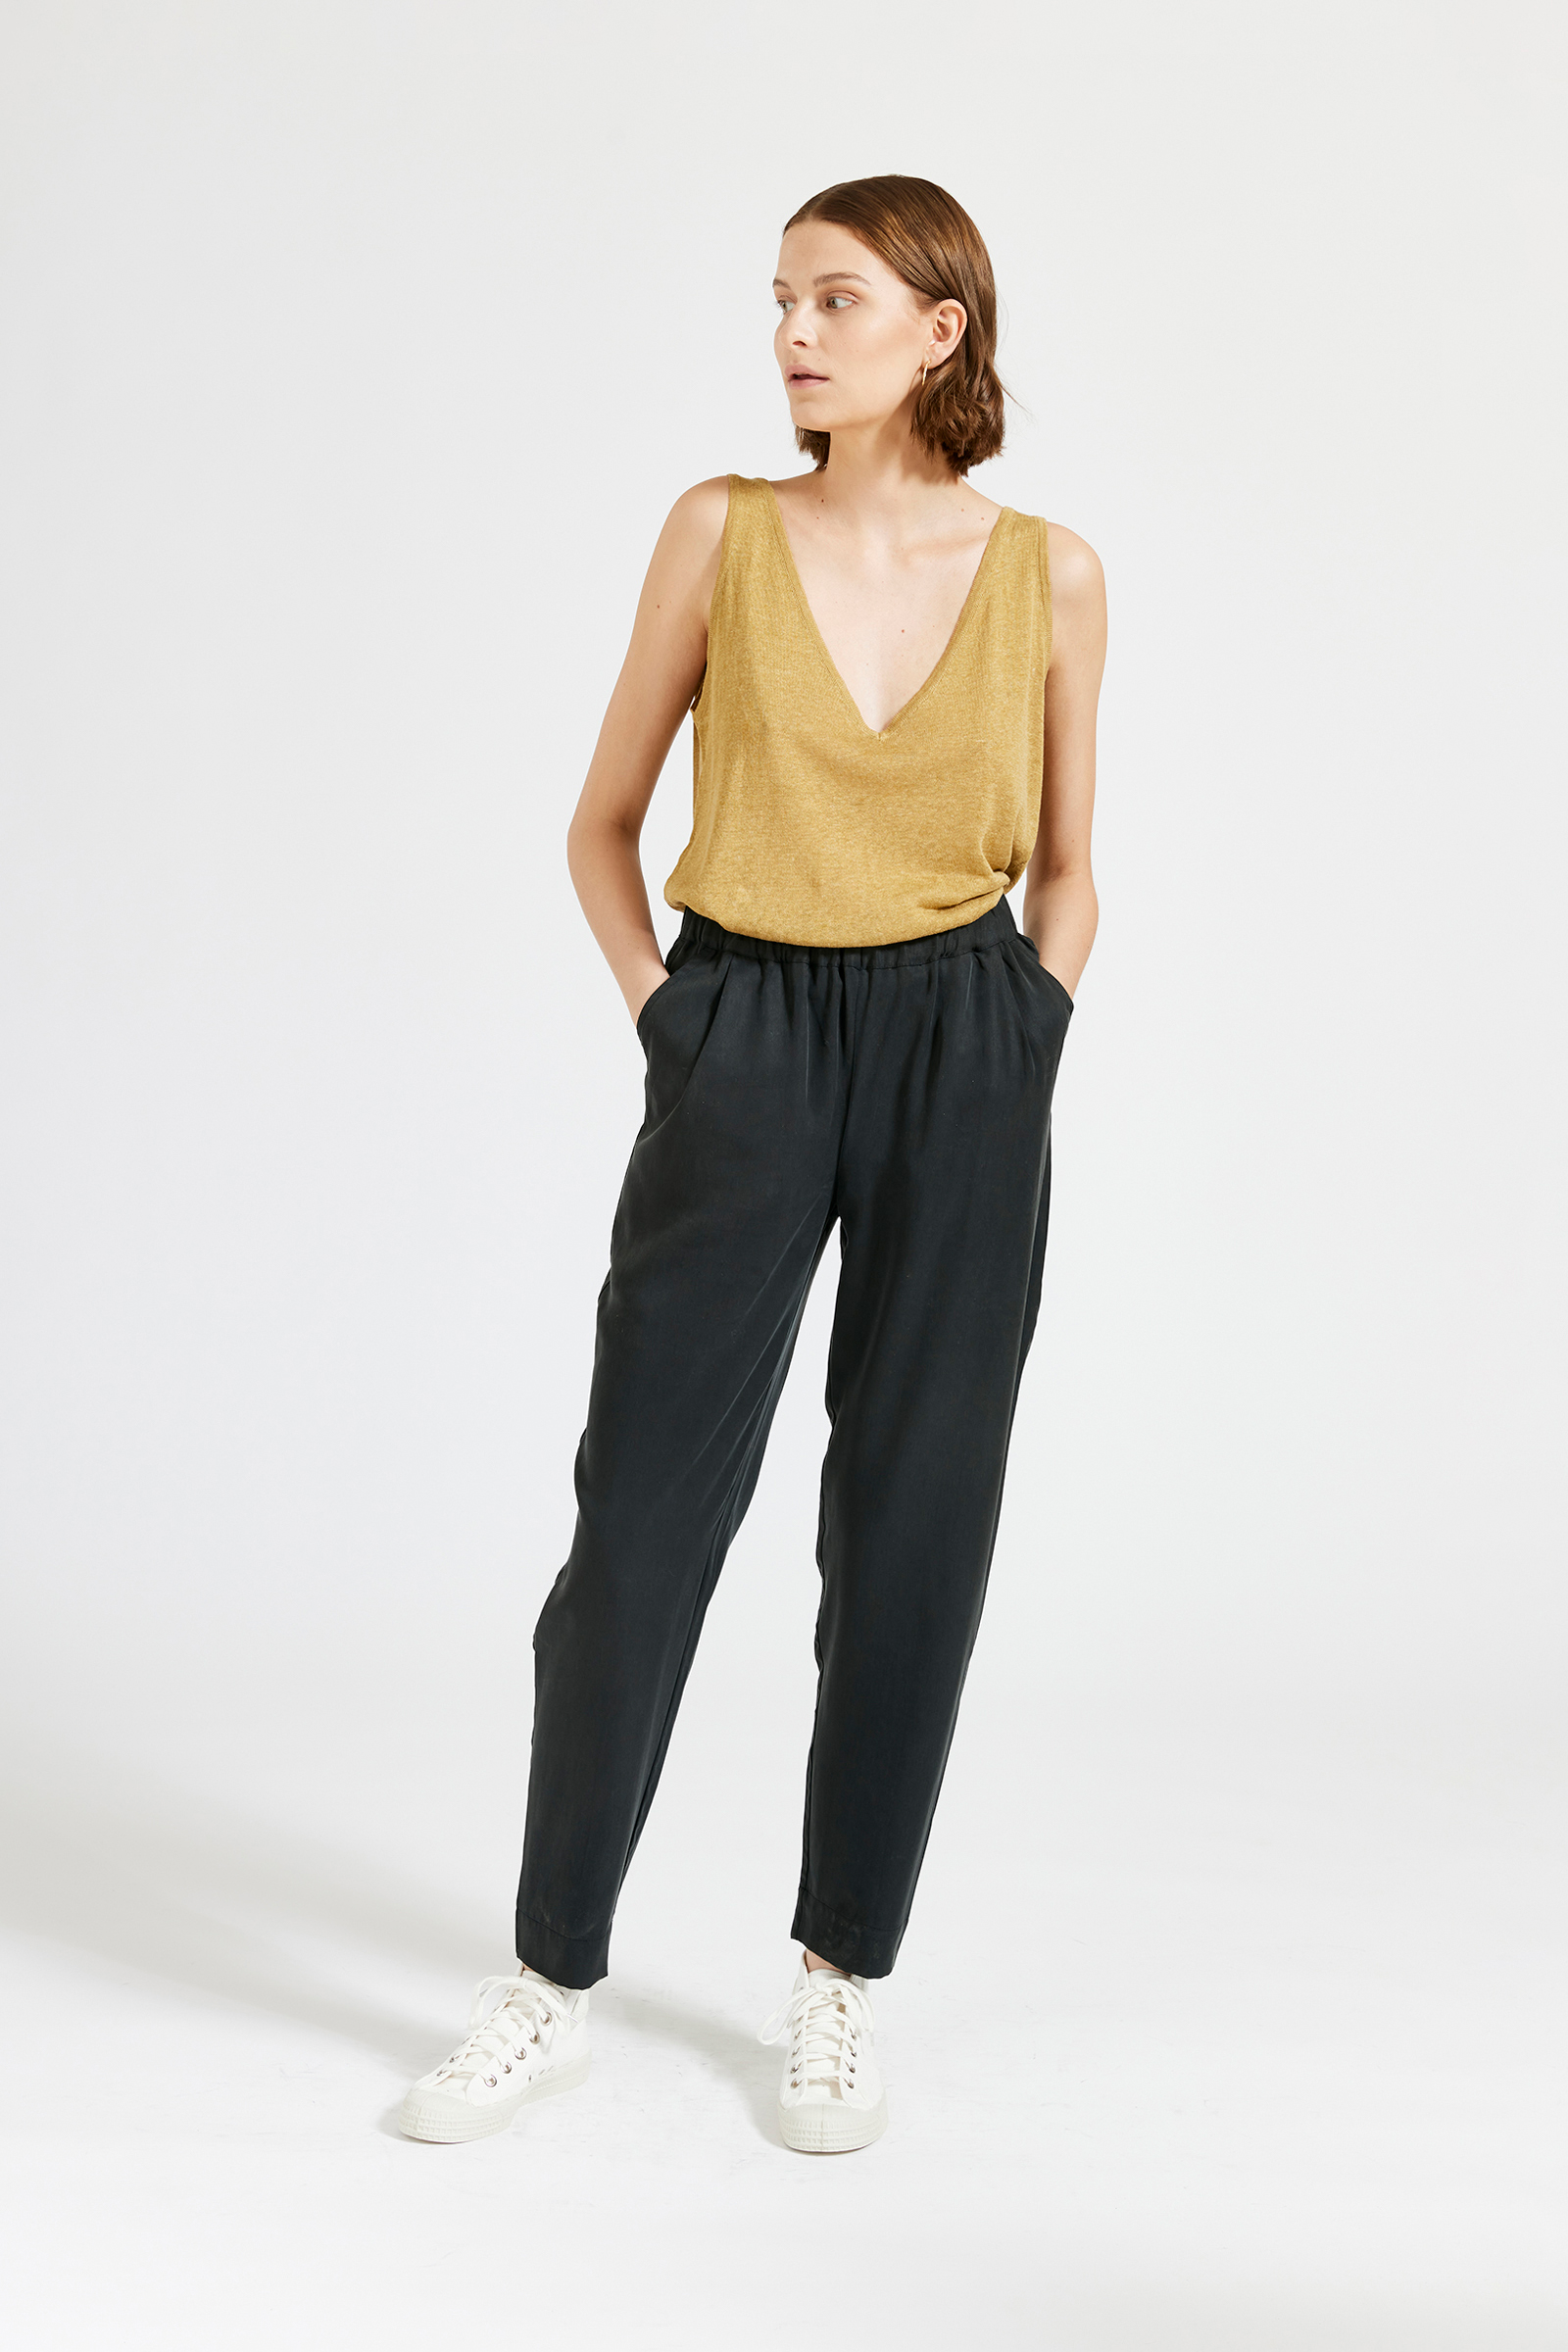 Mango Women's Ribbed Flared Trousers In Black | ModeSens